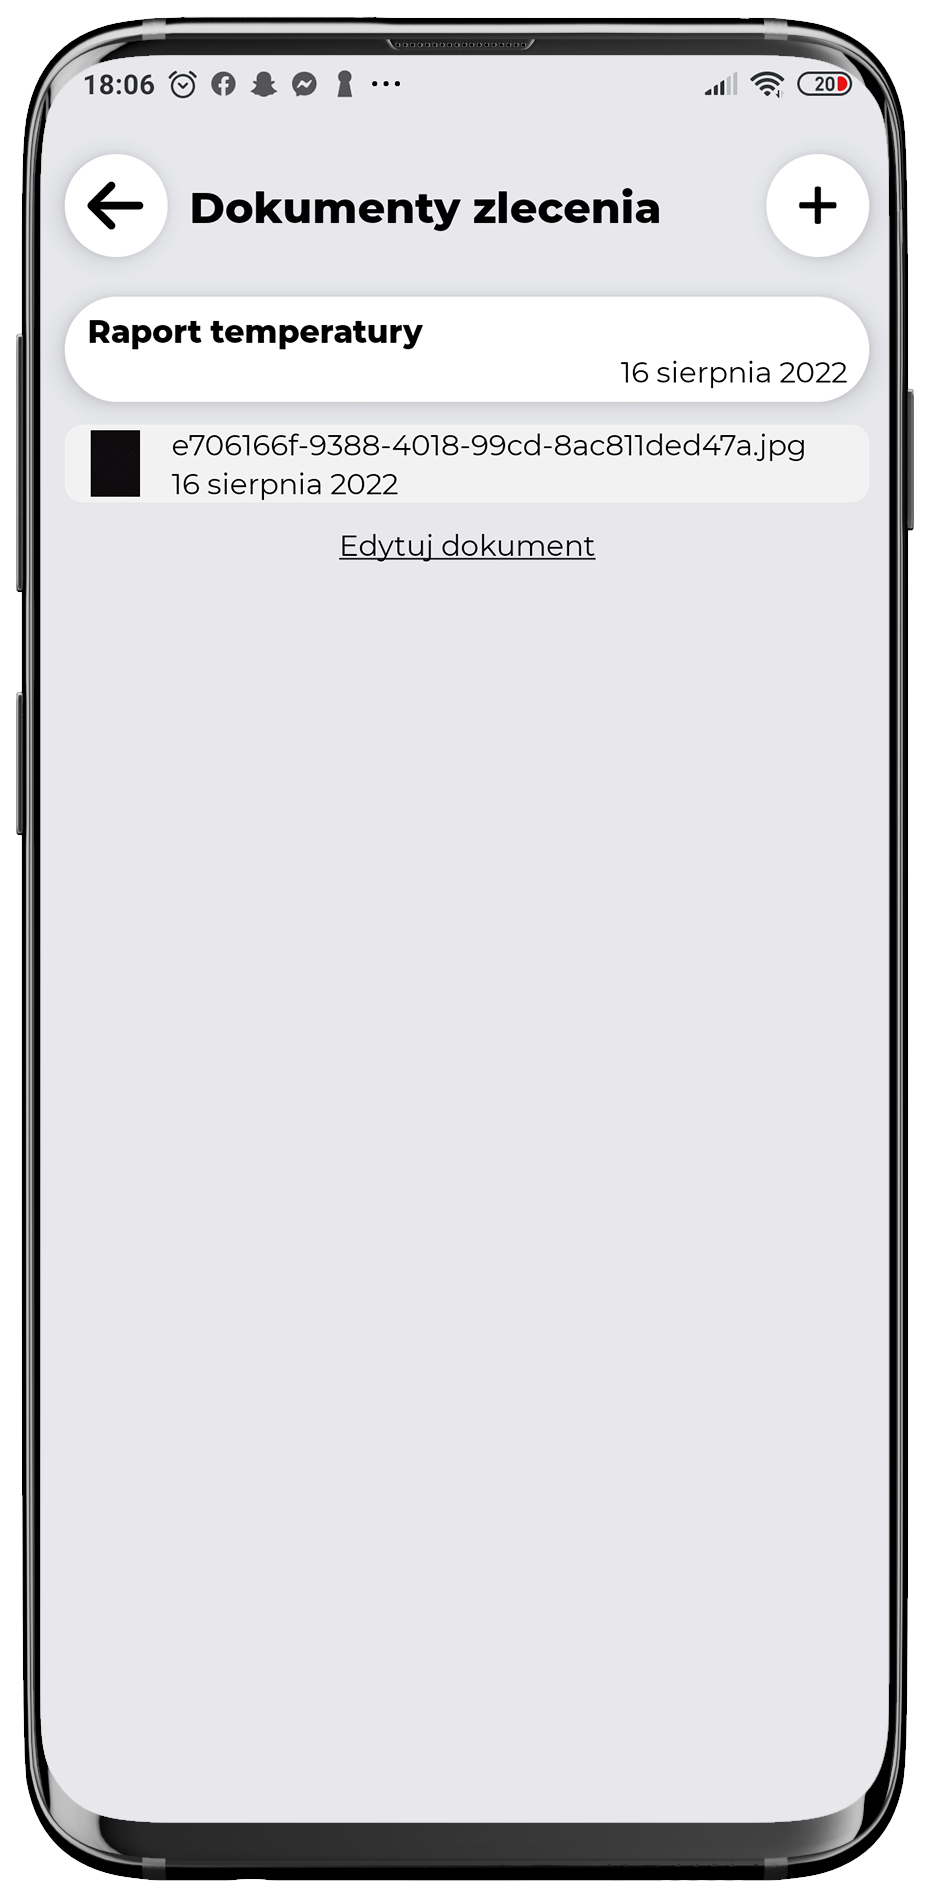 Sydig - Documents in the mobile application